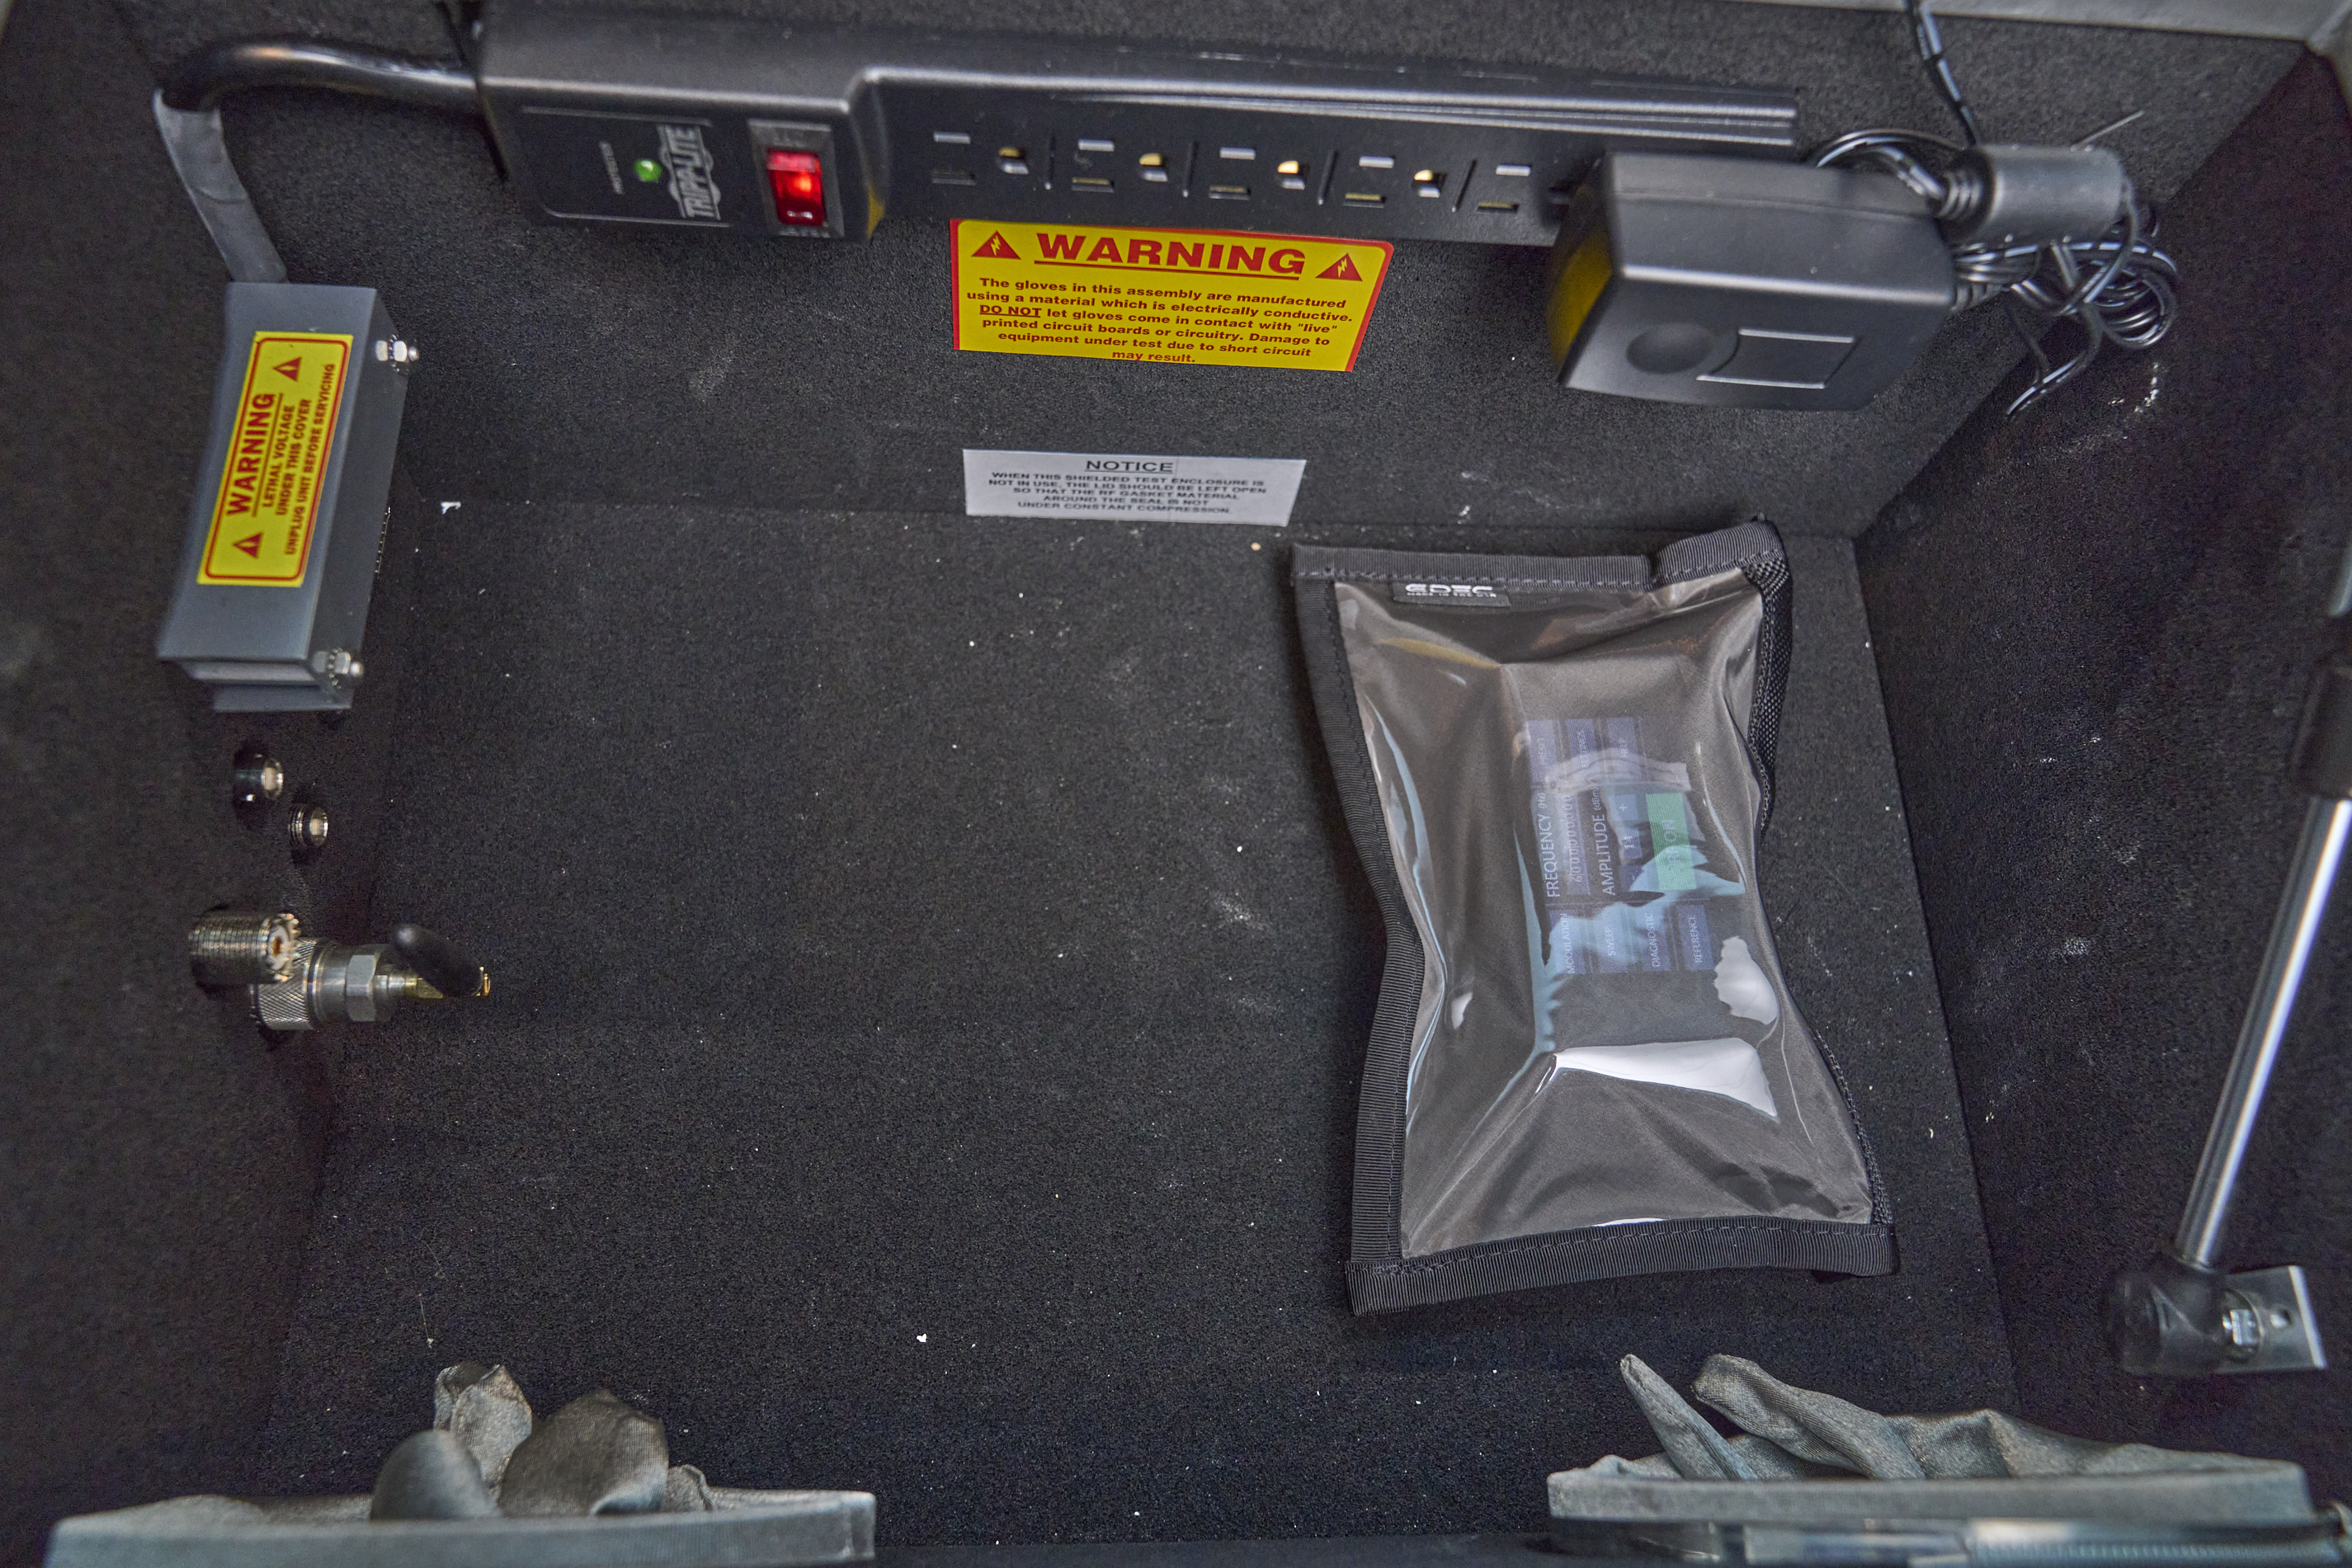 Photo: The inside of the same RF test chamber, but where the previous photo showed a signal generator, this one now shows a bulging outline of a signal generator visible through a clear plastic window of a pouch.